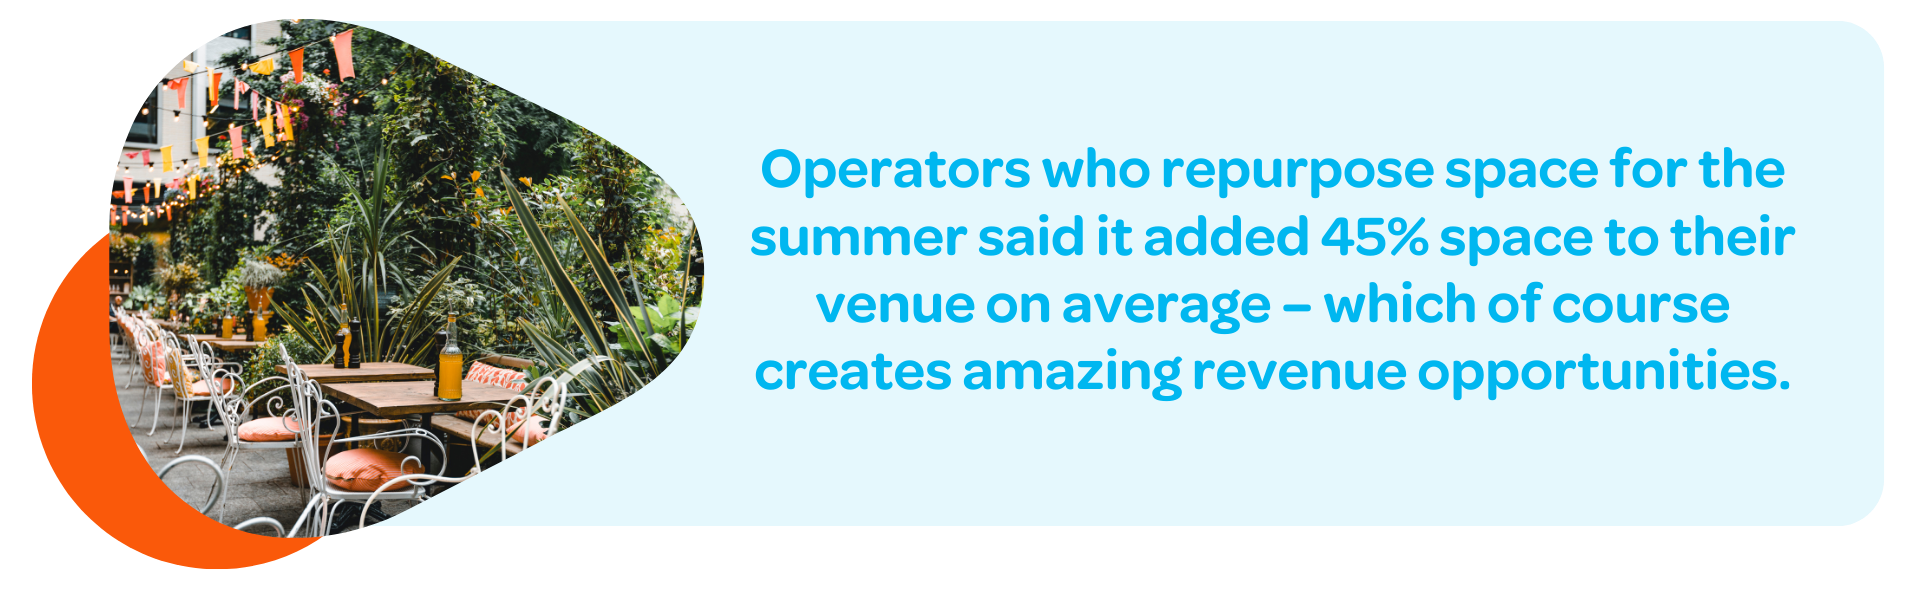 Operators who repurpose space for the summer said it added 45% space to their venue on average – which of course creates amazing revenue opportunities